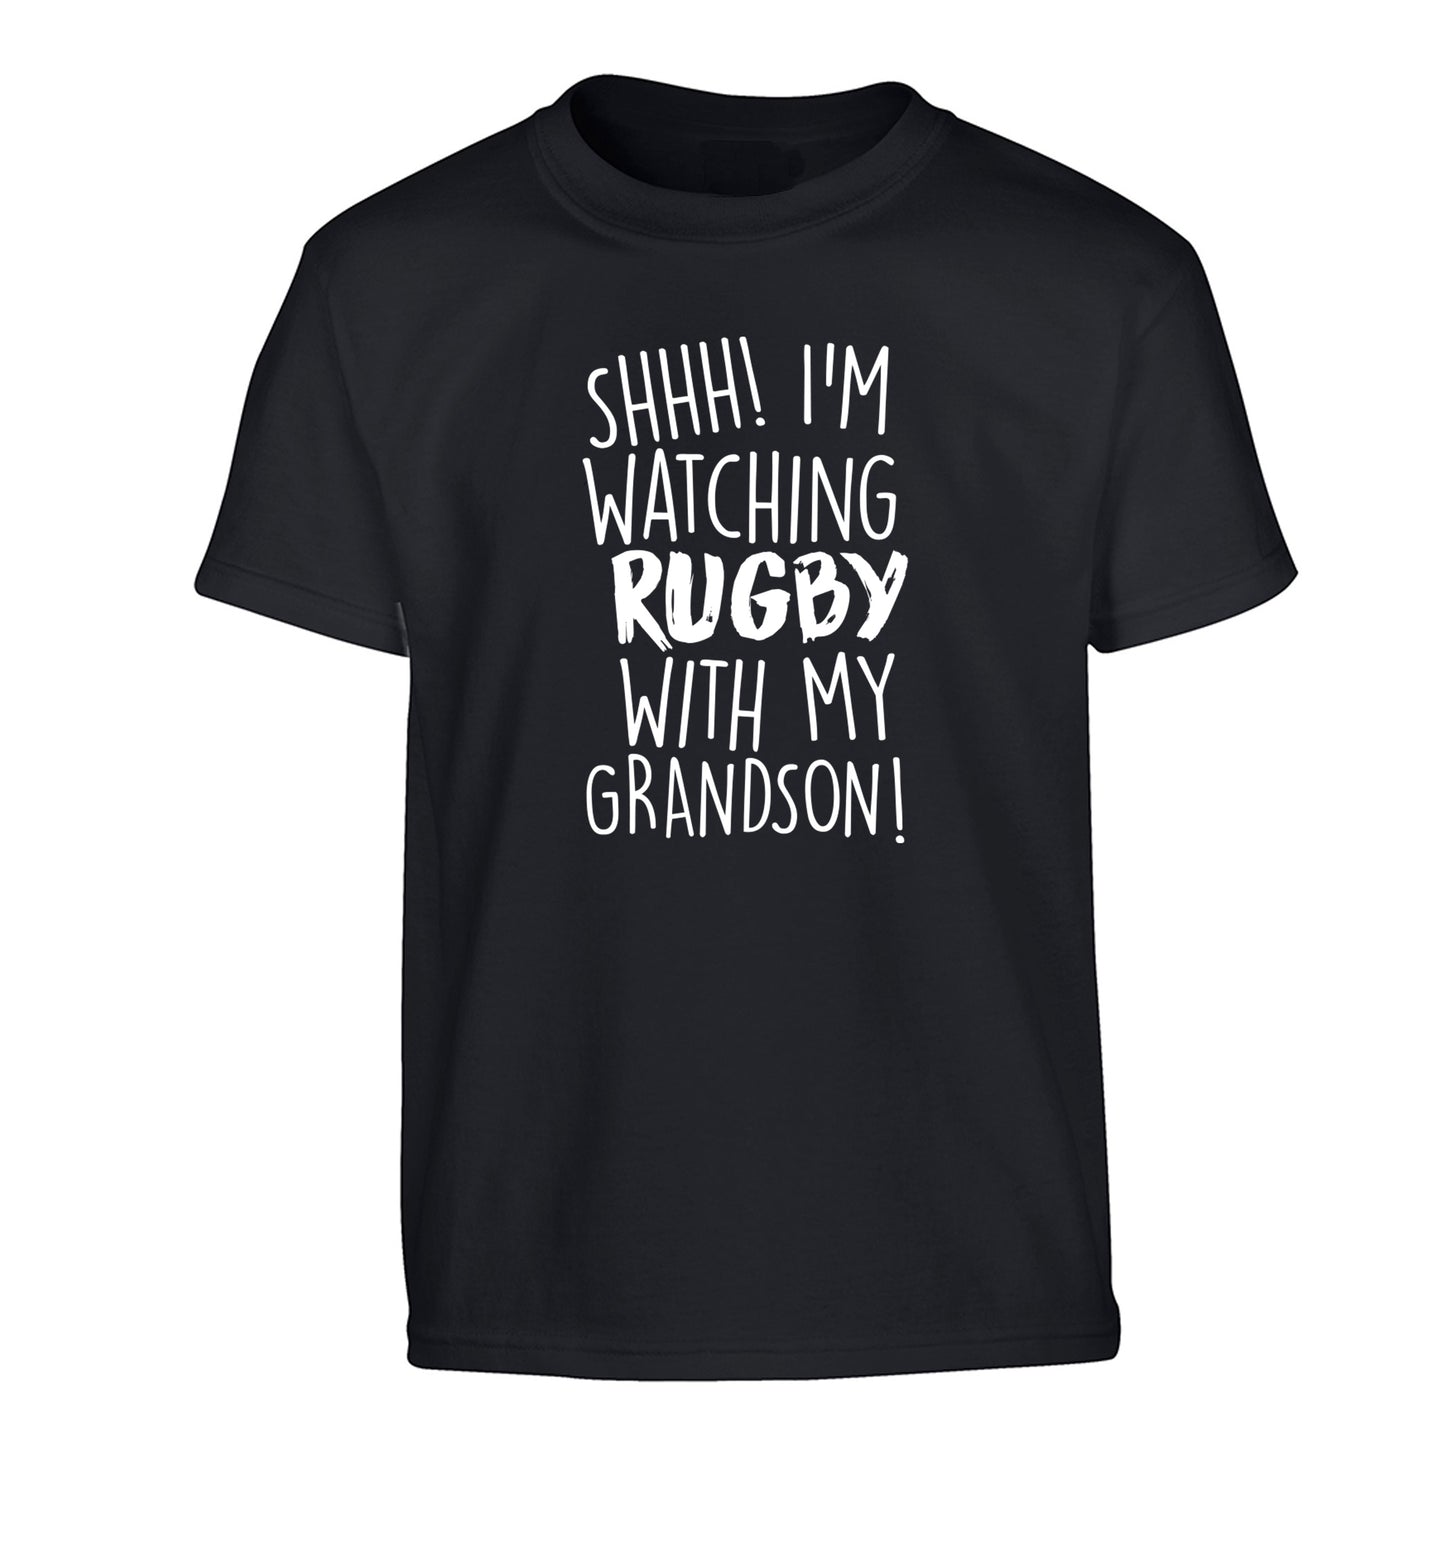 Shh I'm watching rugby with my grandson Children's black Tshirt 12-13 Years